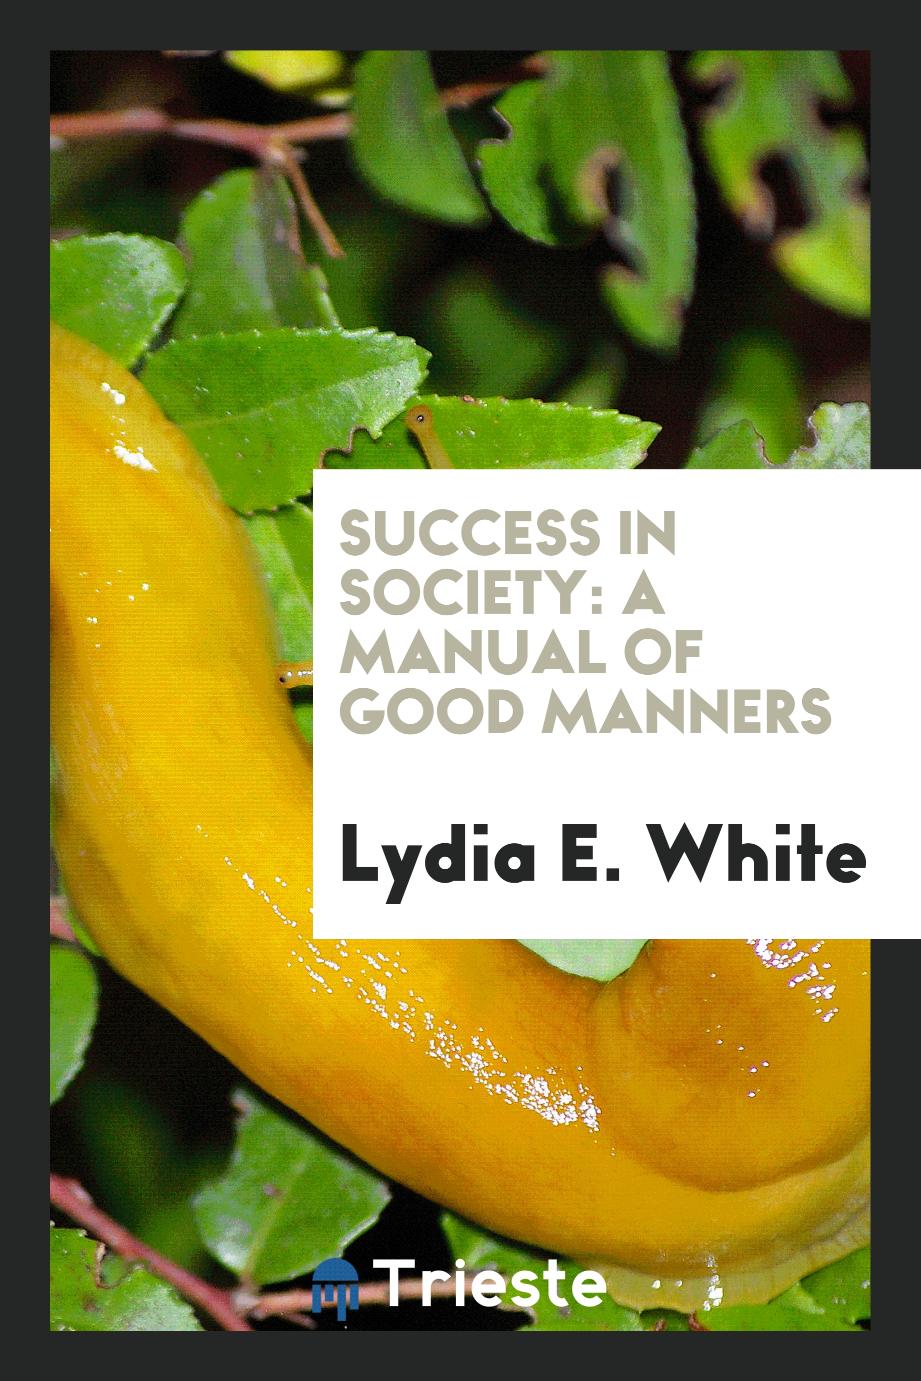 Success in Society: A Manual of Good Manners